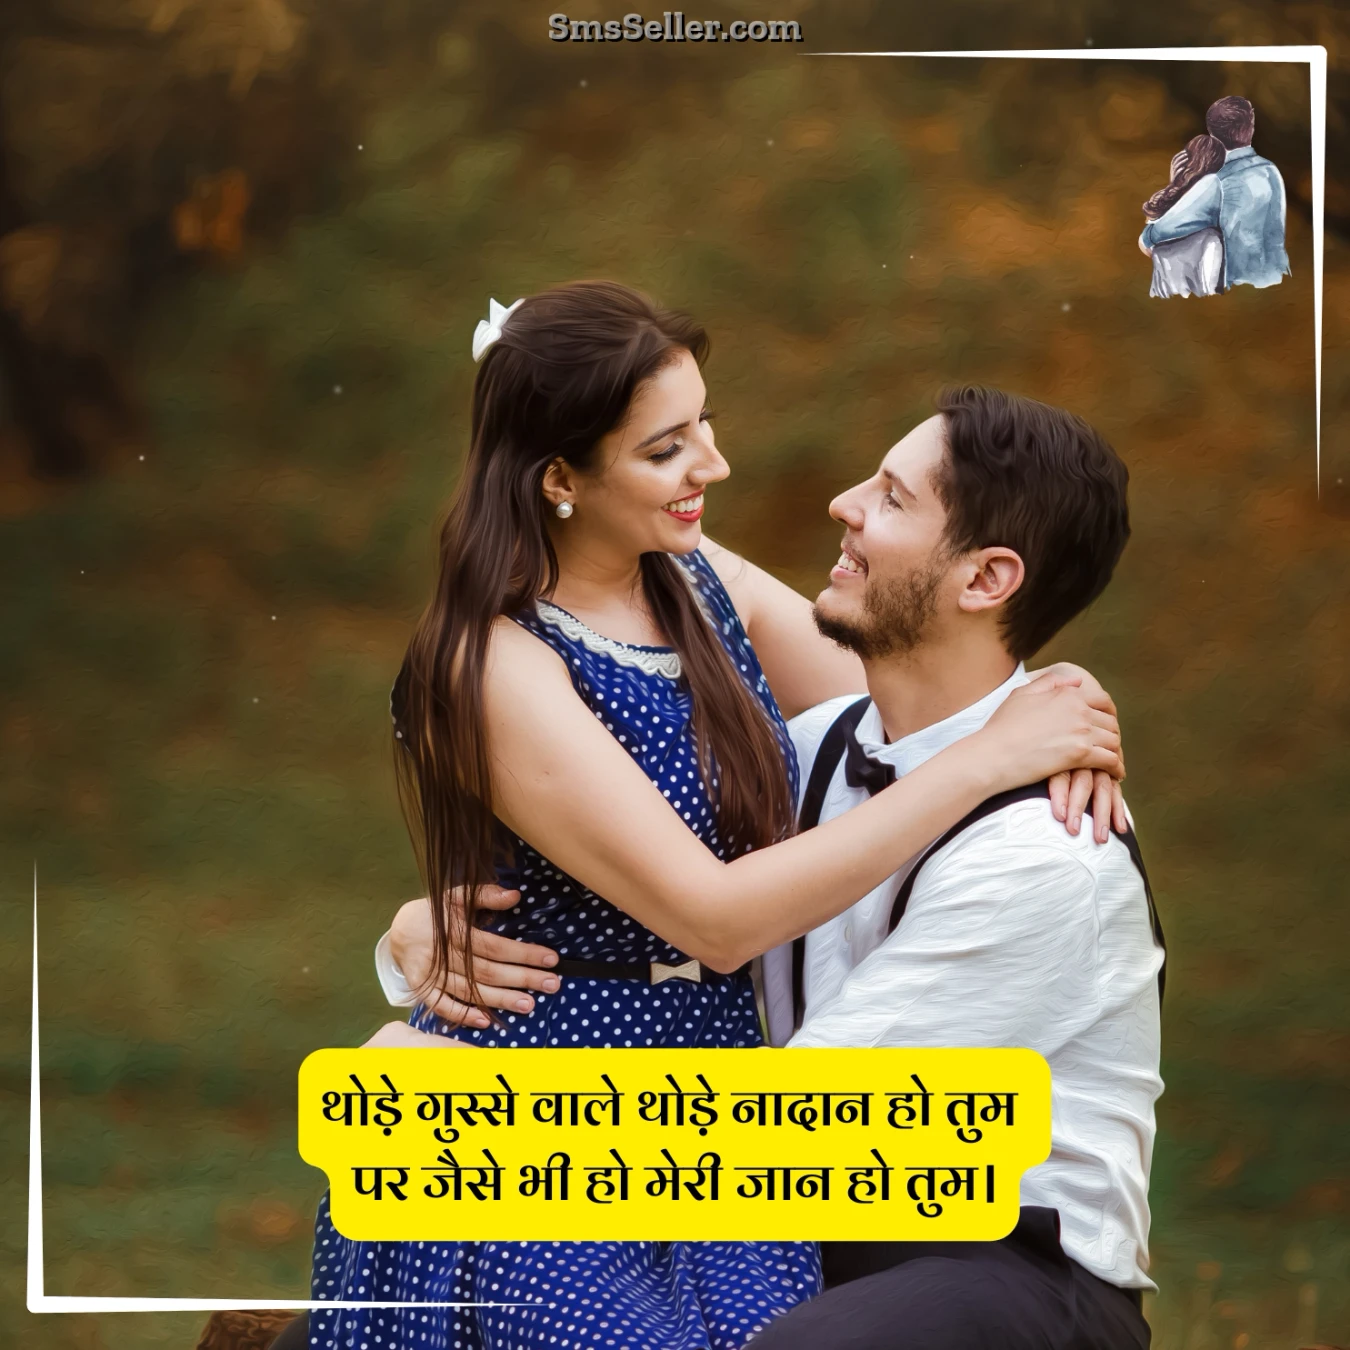 love care quotes in hindi gusse wale naadaan dil